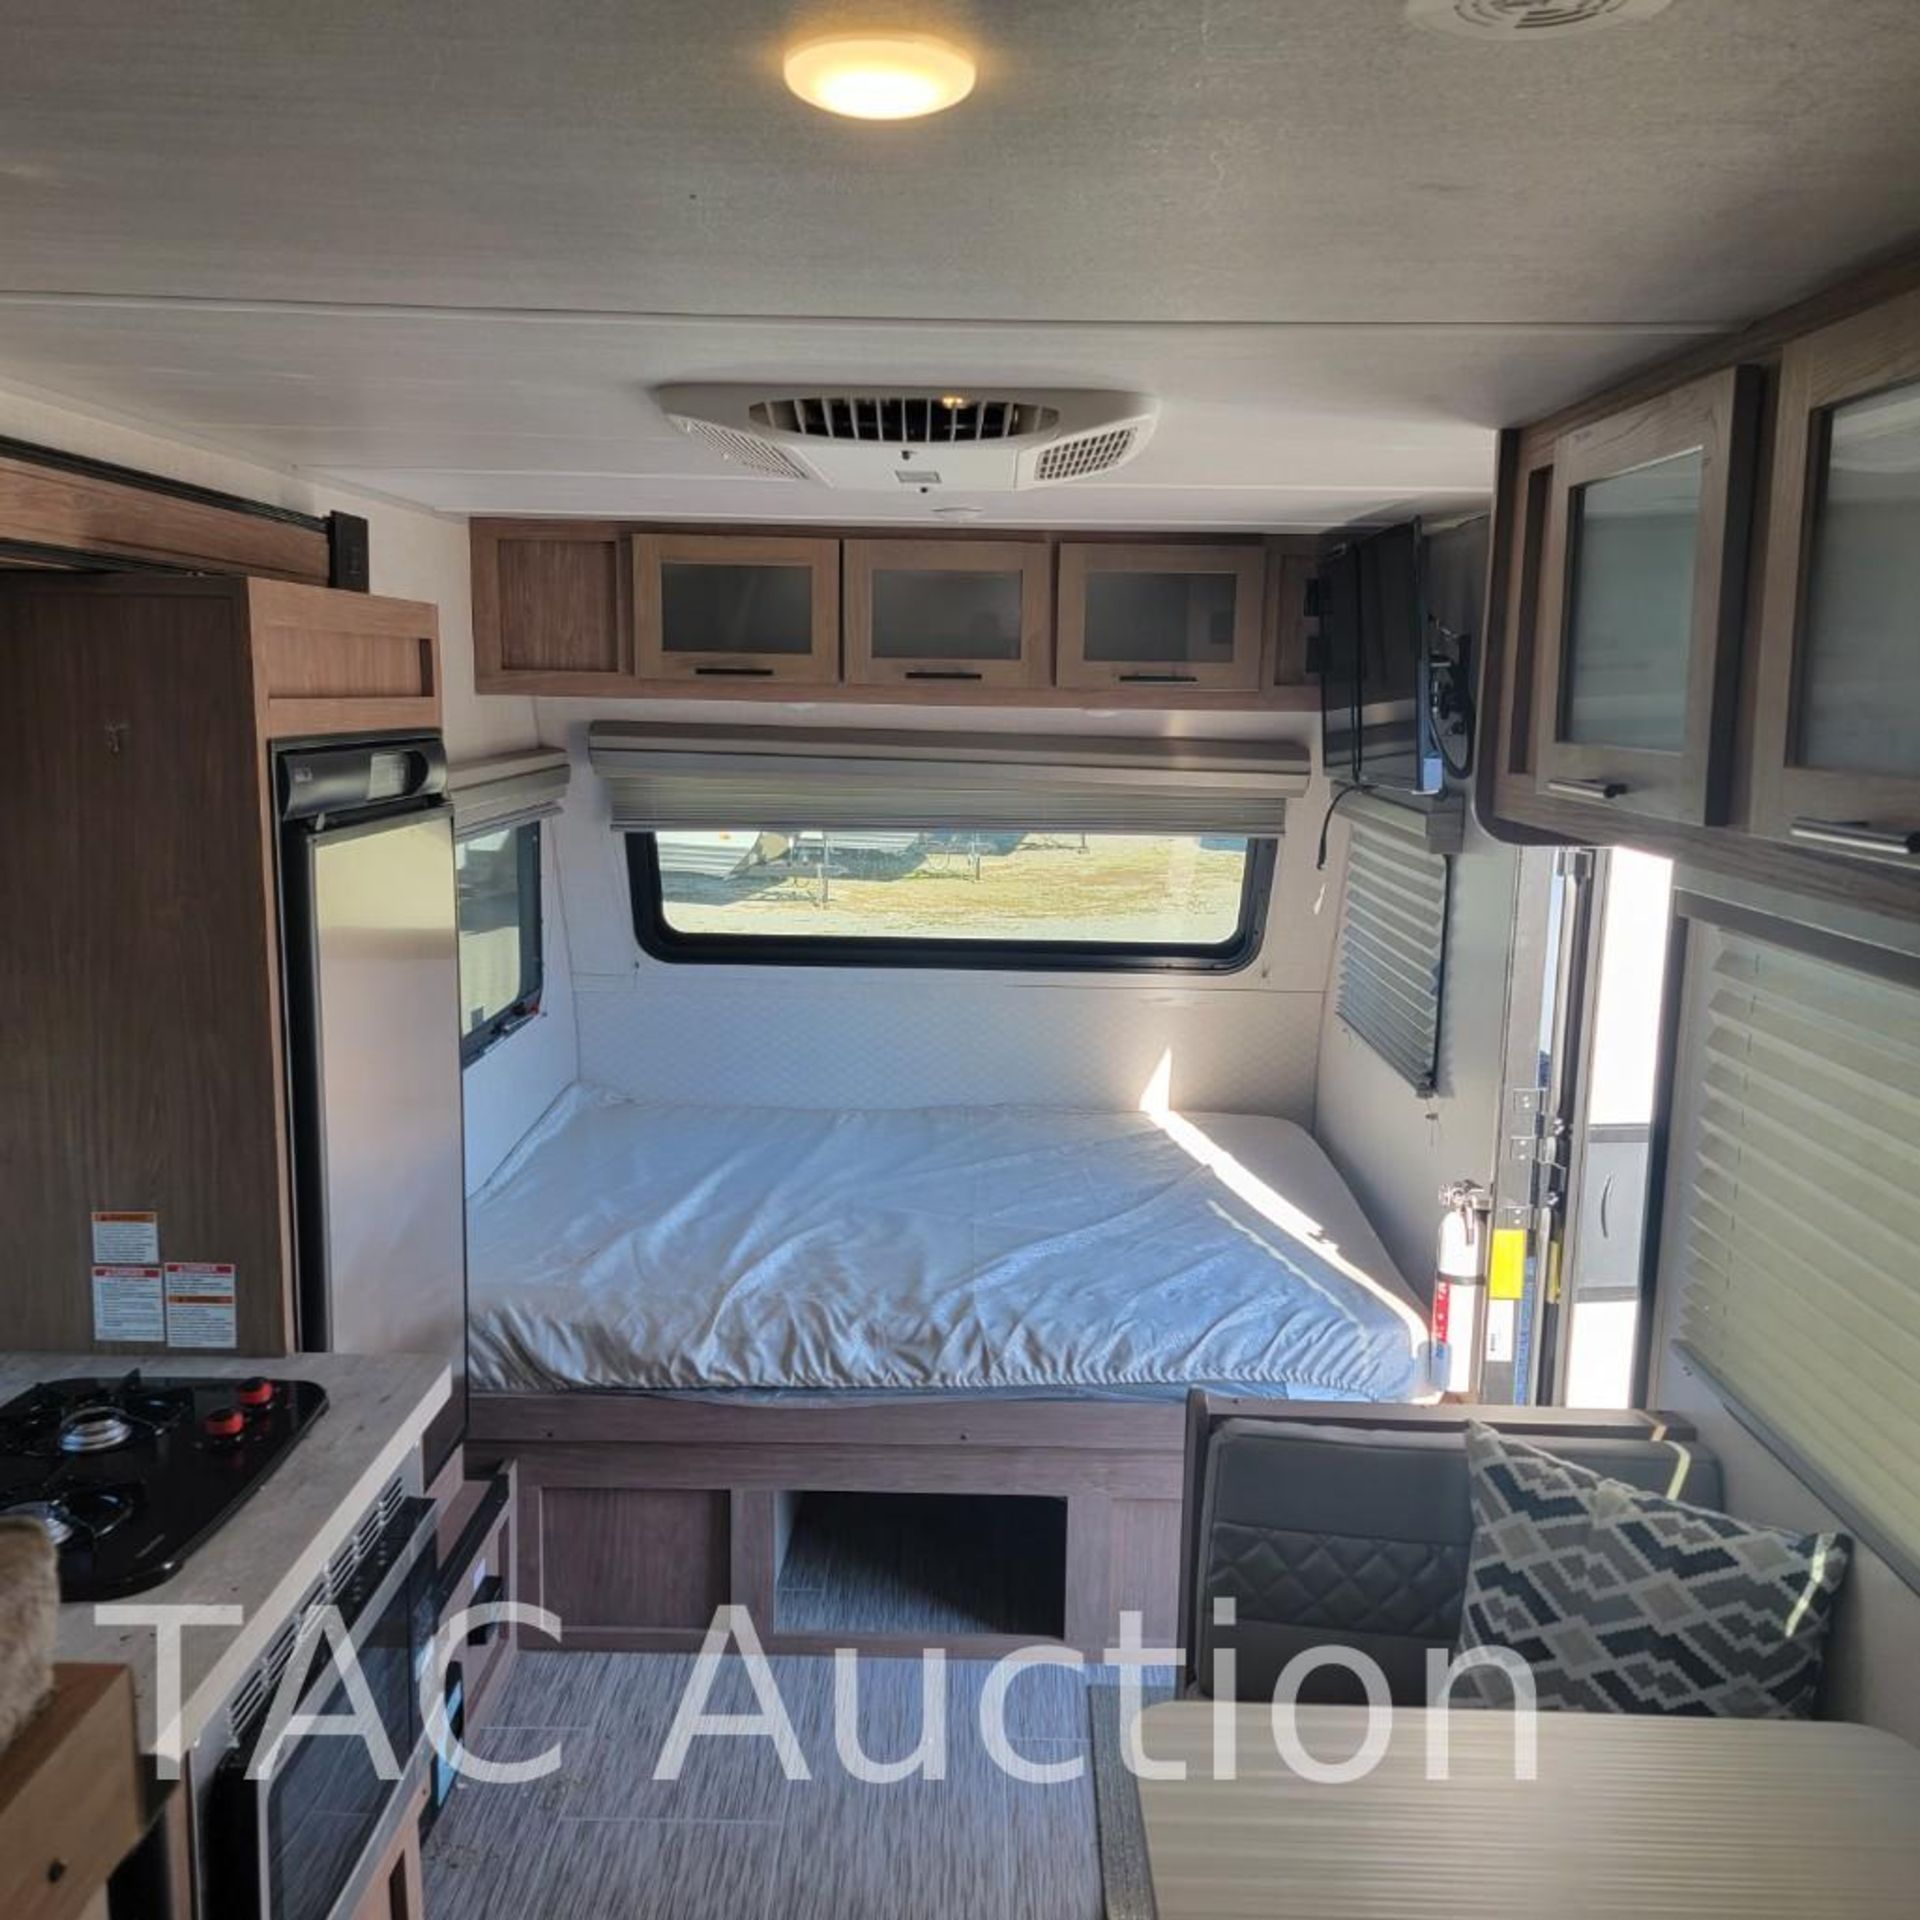 New 2022 Forest River NOBO 16.6 Bumper Pull Camper - Image 15 of 20